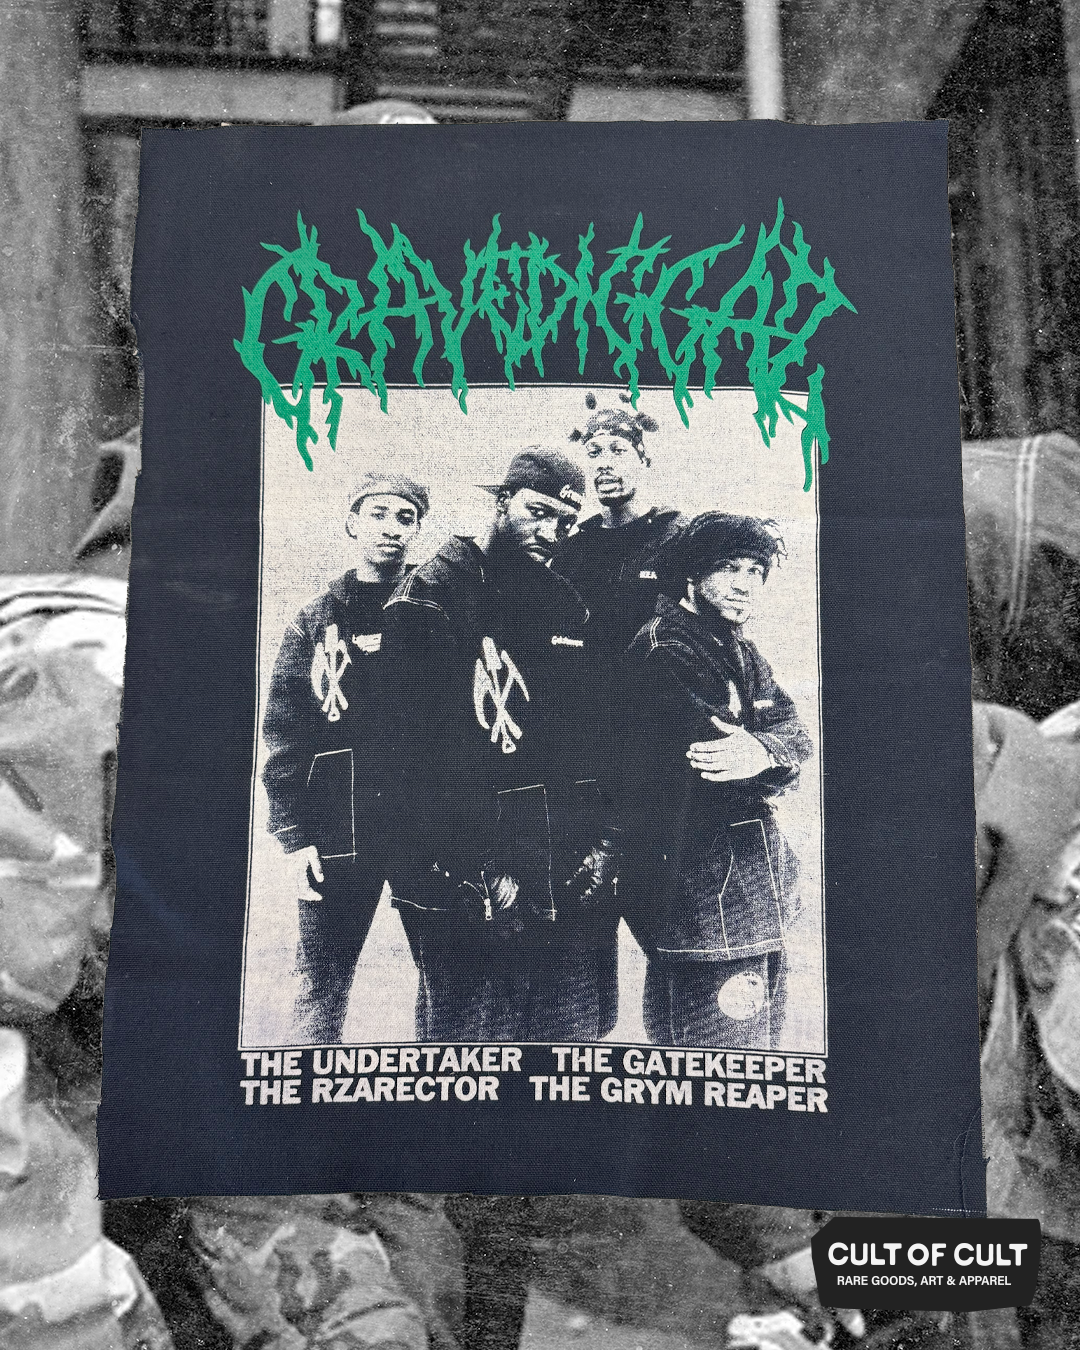 The front view of the Gravediggaz black back patch